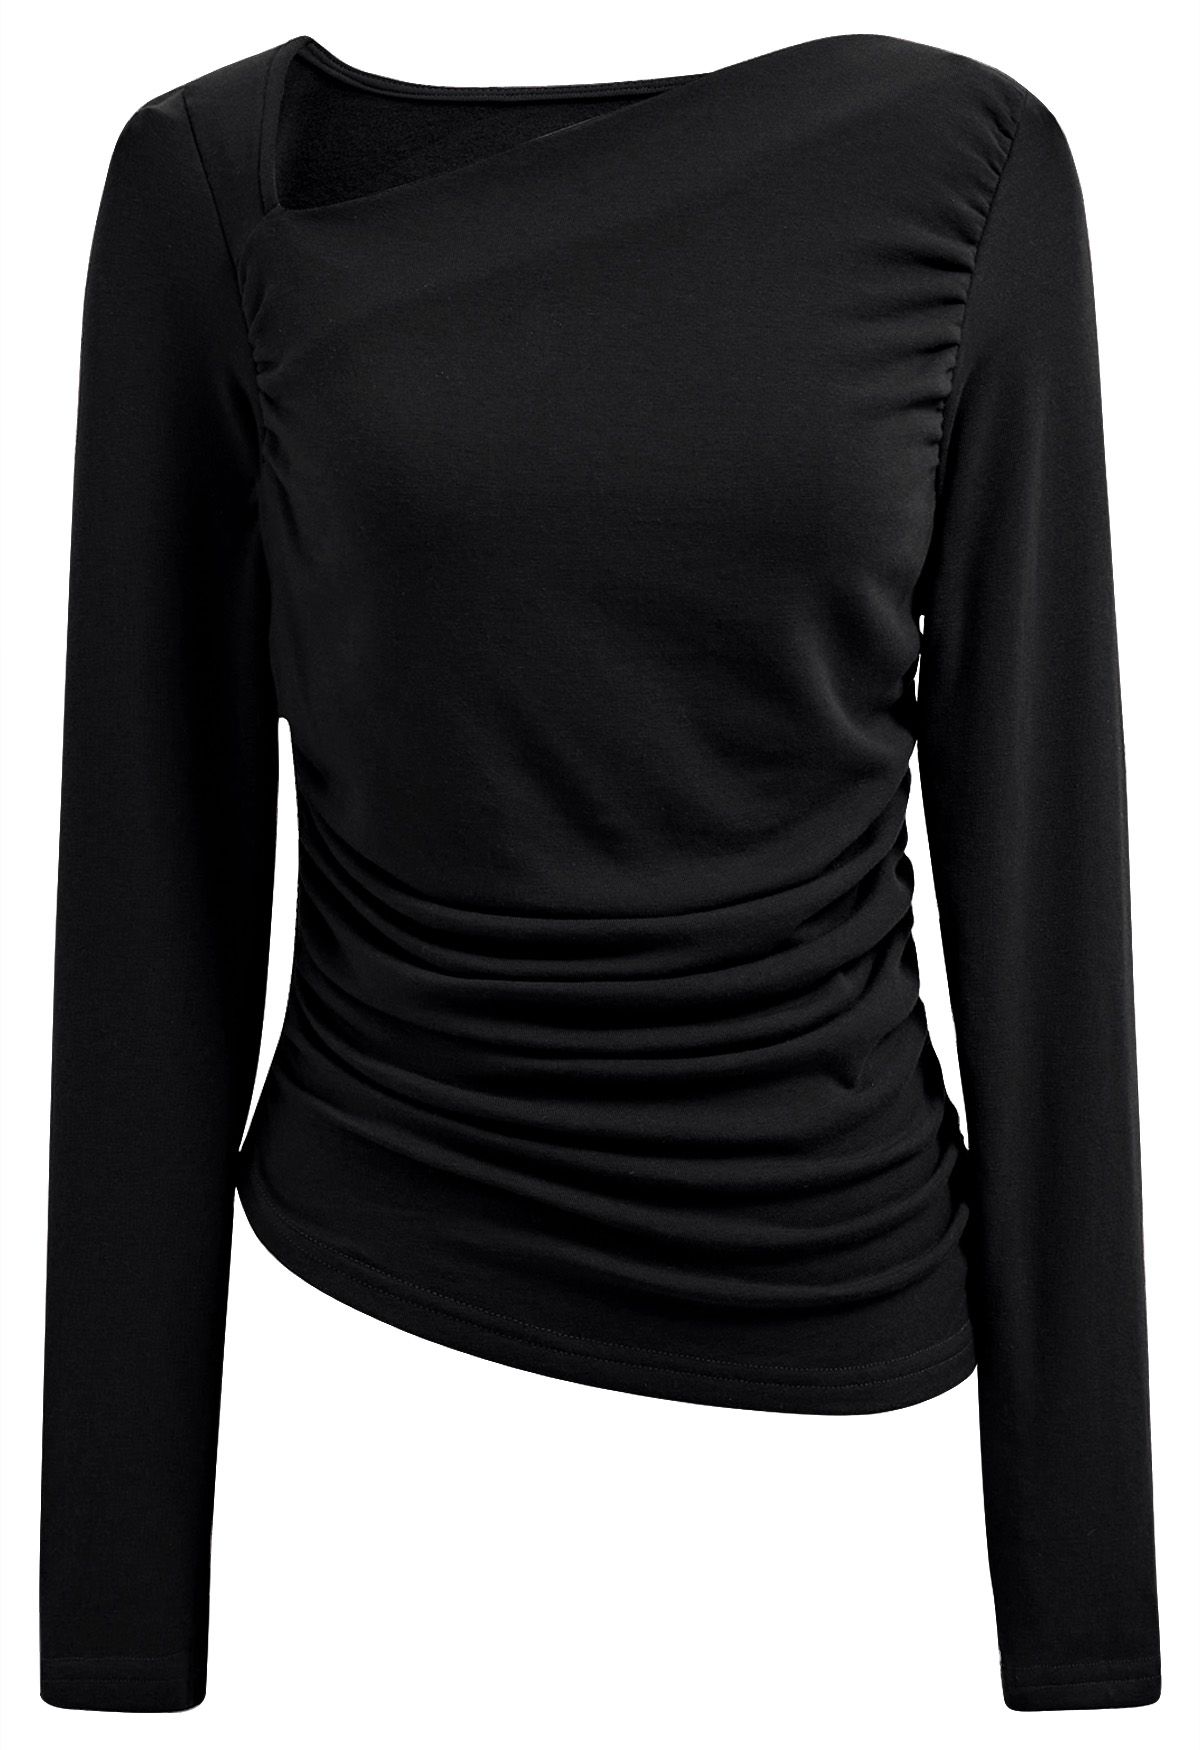 Asymmetric Neck Ruched Long Sleeve Top in Black - Retro, Indie and ...